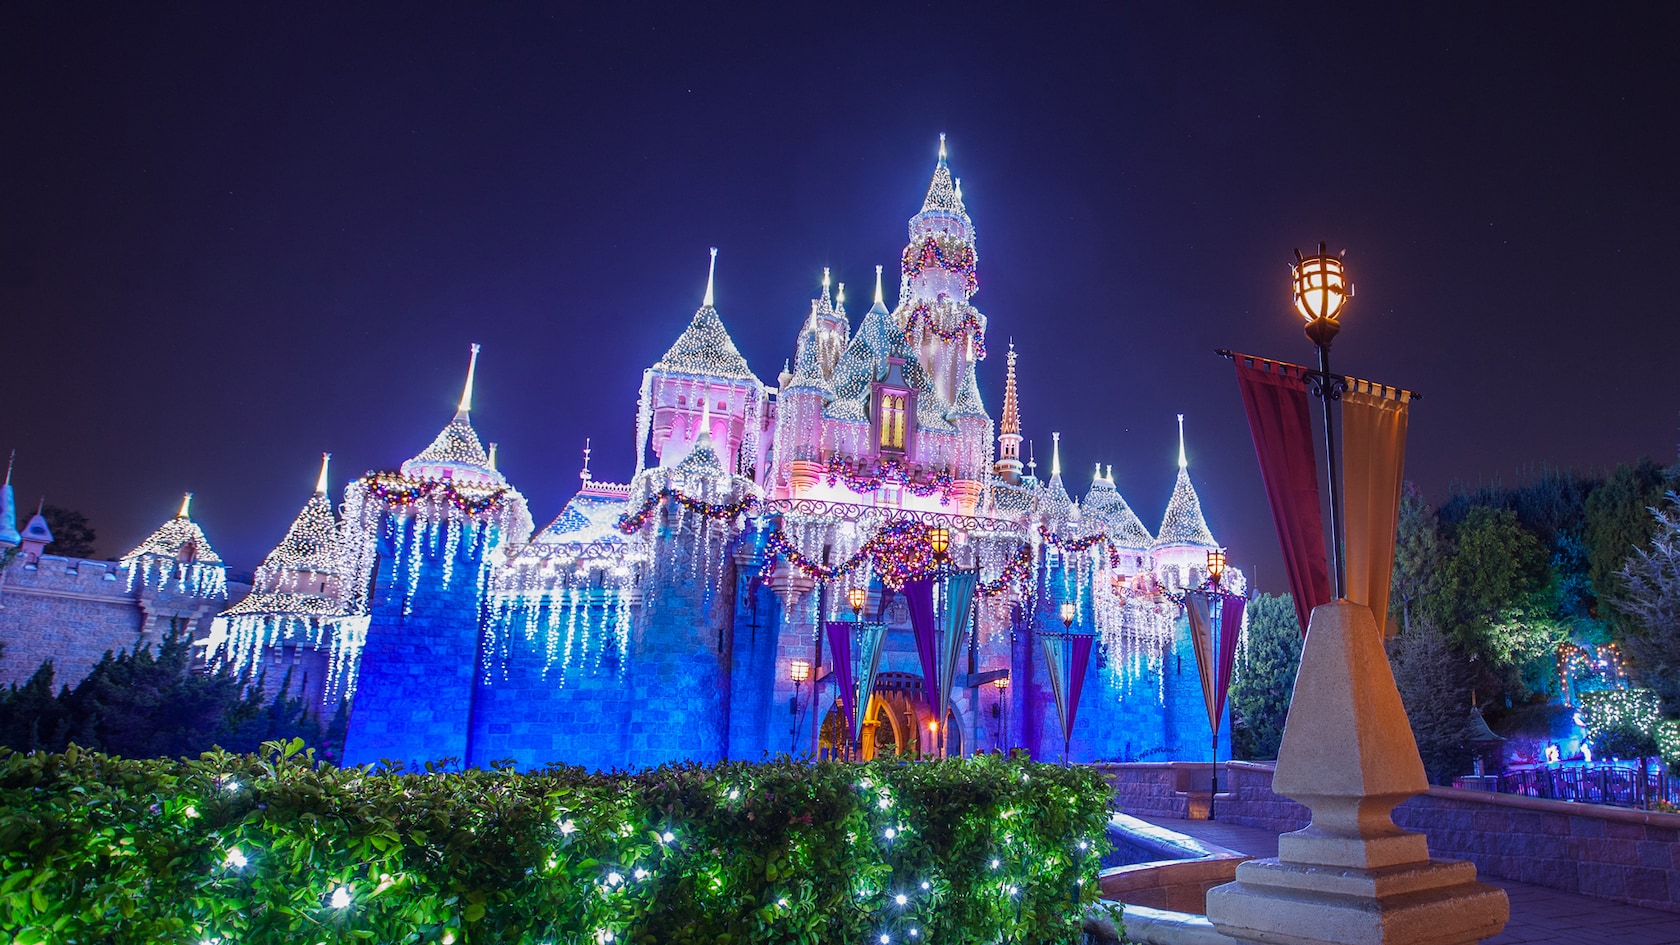 When Does Disneyland Decorate For Christmas? - A Disney